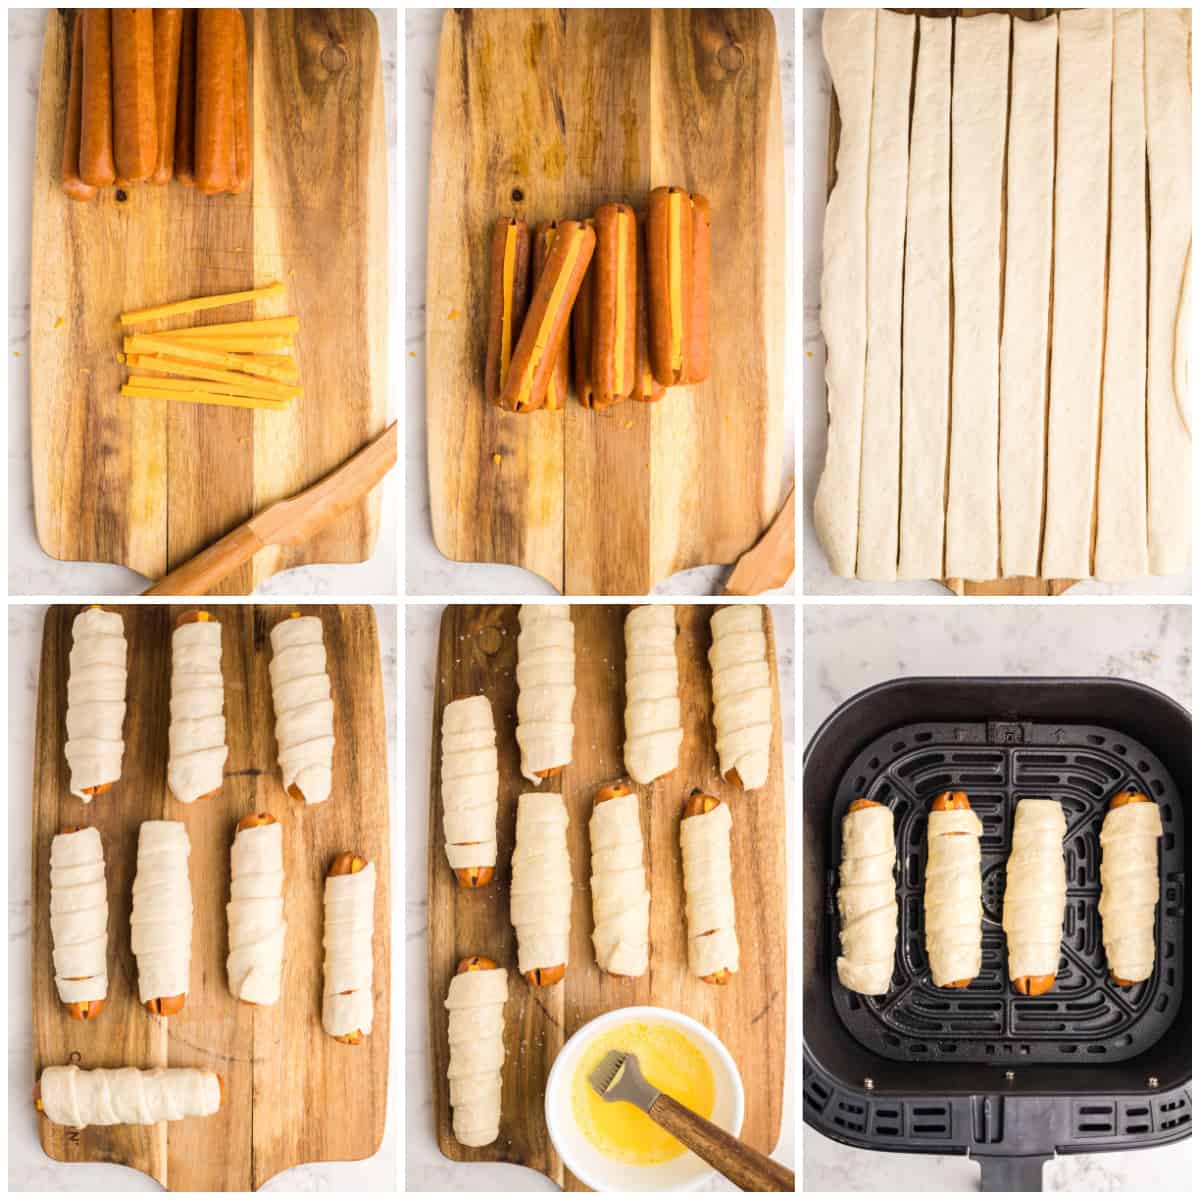 Step by step Photos on how to make Air Fryer Pretzel Dogs.